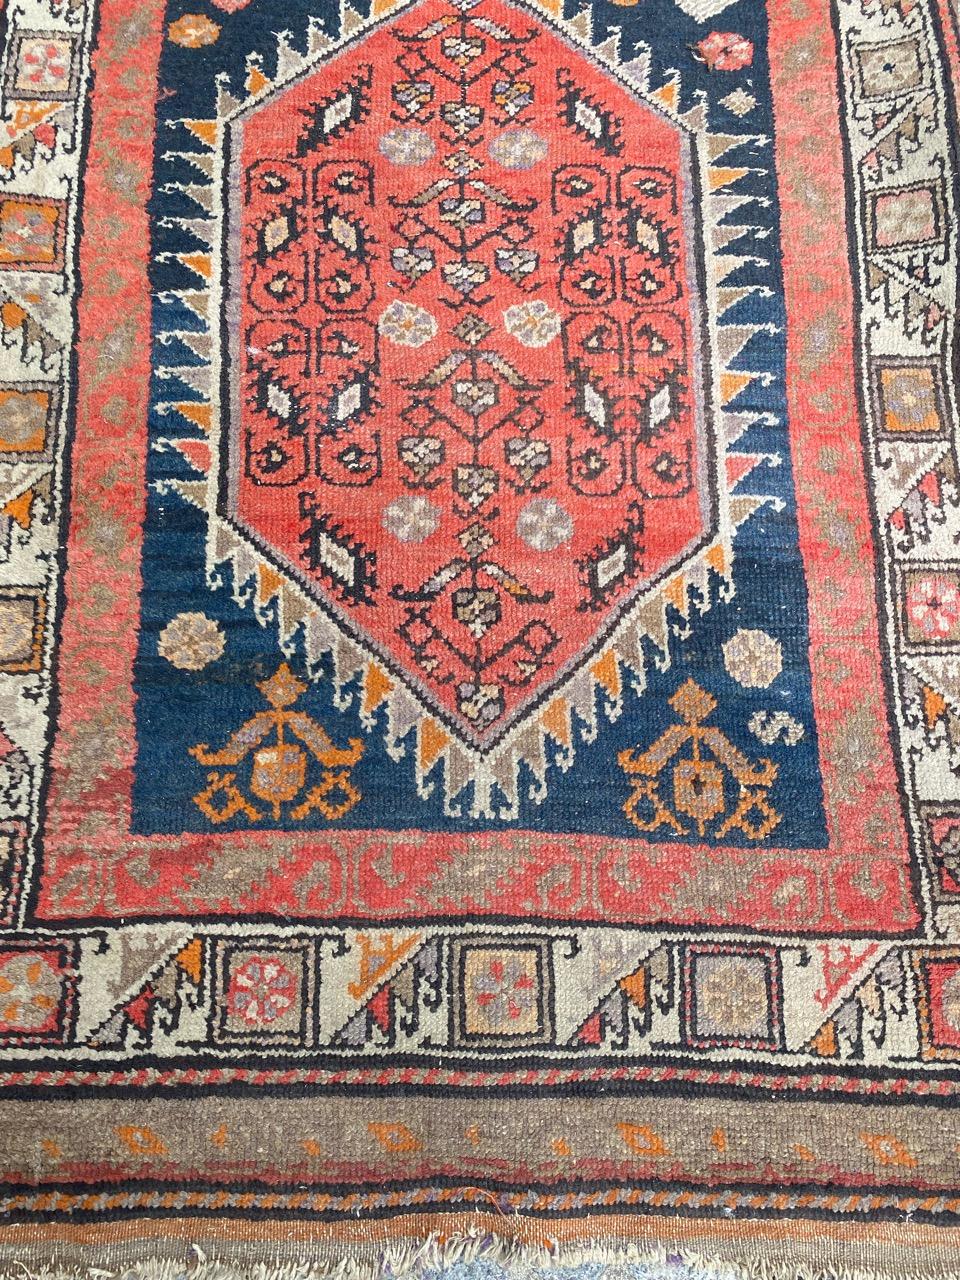 Beautiful late 19th century tribal kurdish runner with beautiful geometrical design and nice natural colors, entirely hand knotted with wool velvet on cotton foundation.

✨✨✨
